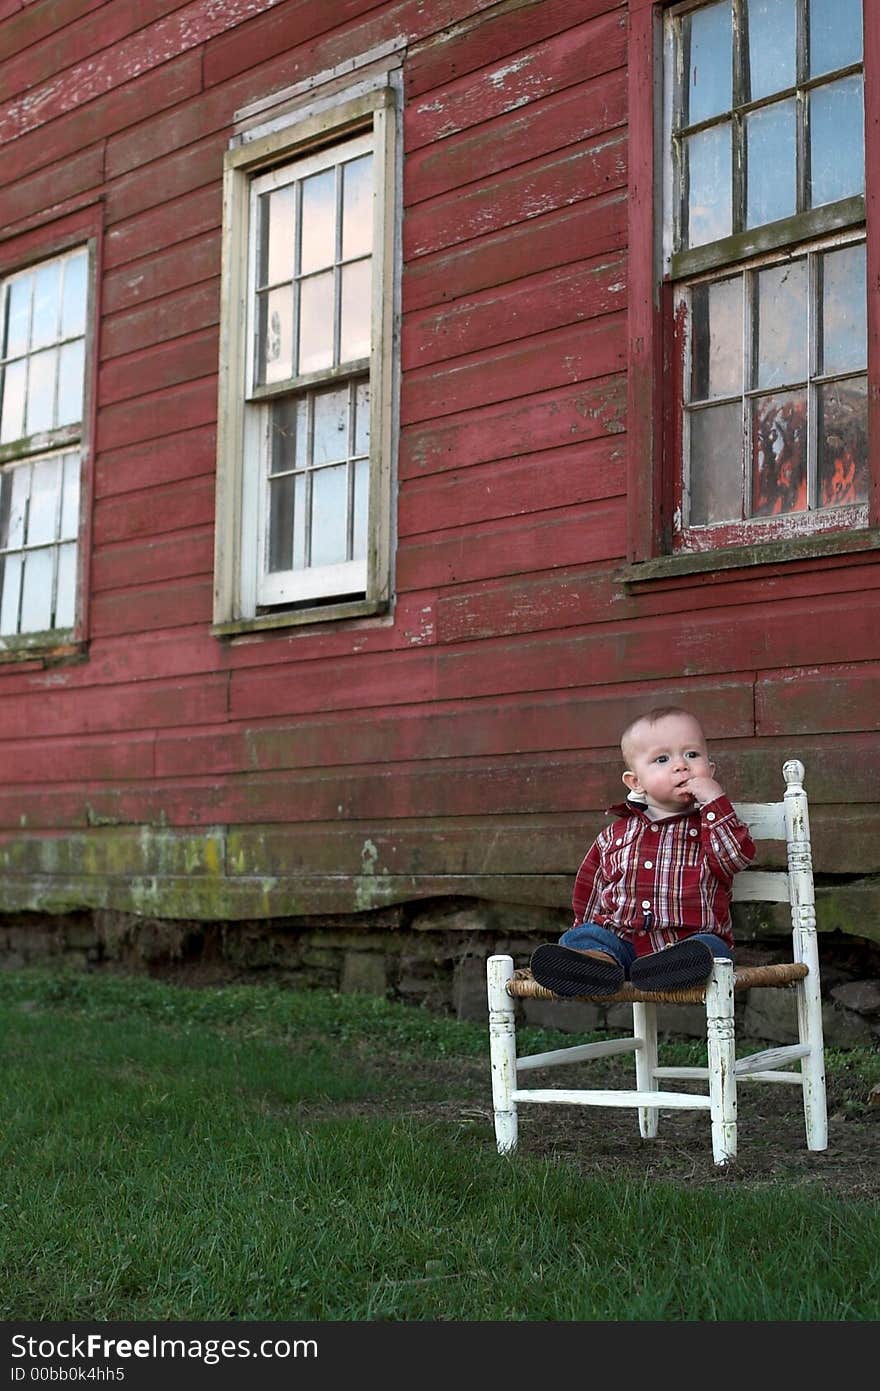 Image of baby boy sitting on a chair in front of a red farm building. Image of baby boy sitting on a chair in front of a red farm building